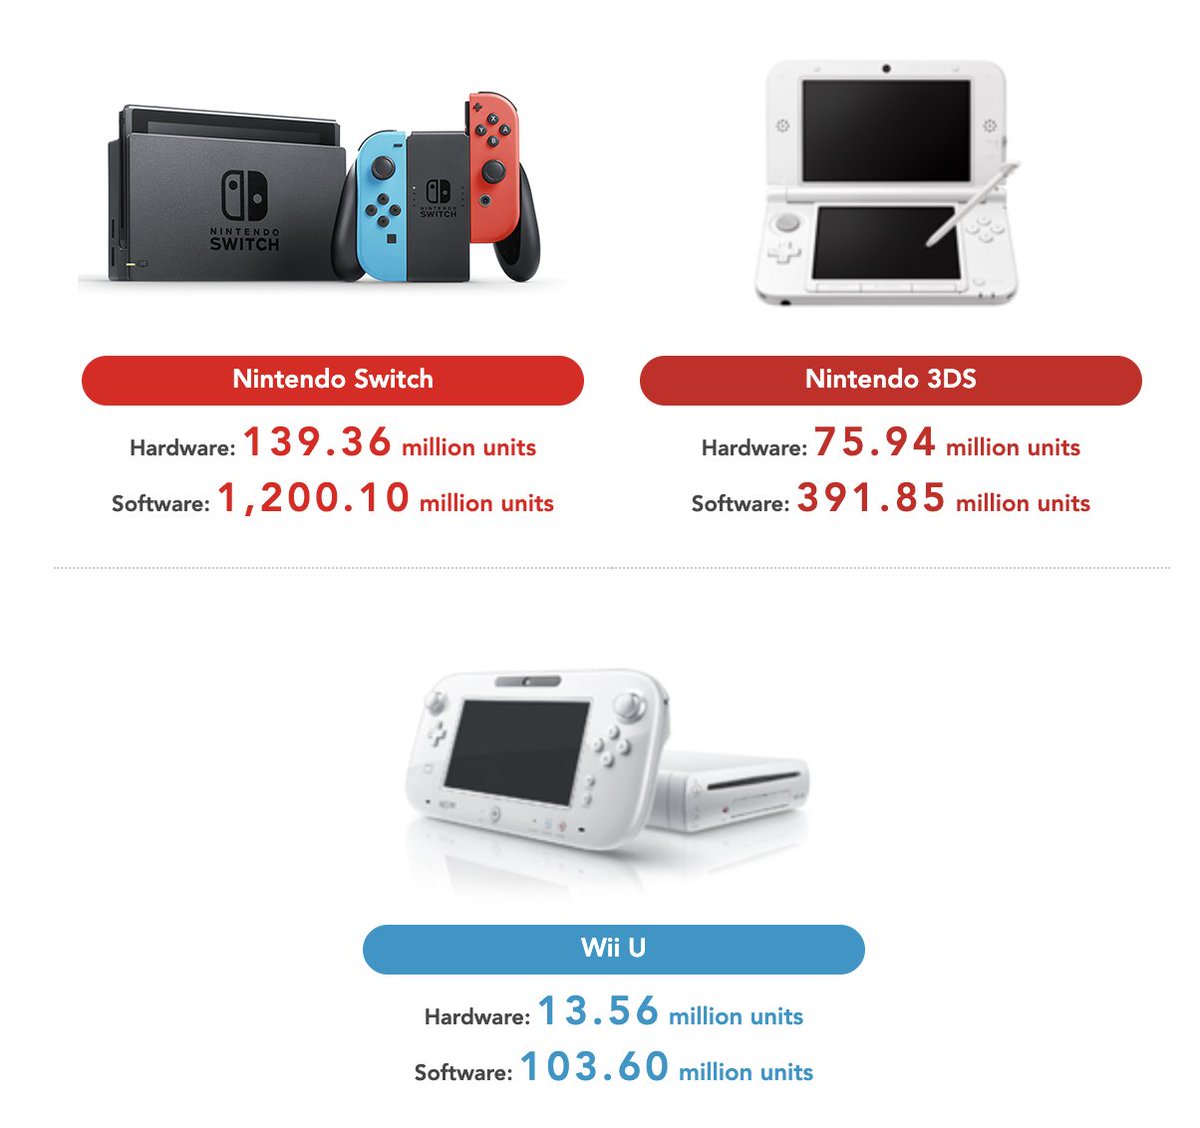 Nintendo has provided a sales update for the Switch's top sellers up to Dec 31, 2023. Pokémon updates: ➤ Pokémon Scarlet & Violet: 24.36 million units (was 23.23 as of Sept 30) ➤ Sword & Shield: 26.17m (was 26.02) Meanwhile, the Nintendo Switch has hit 139.36 million units.